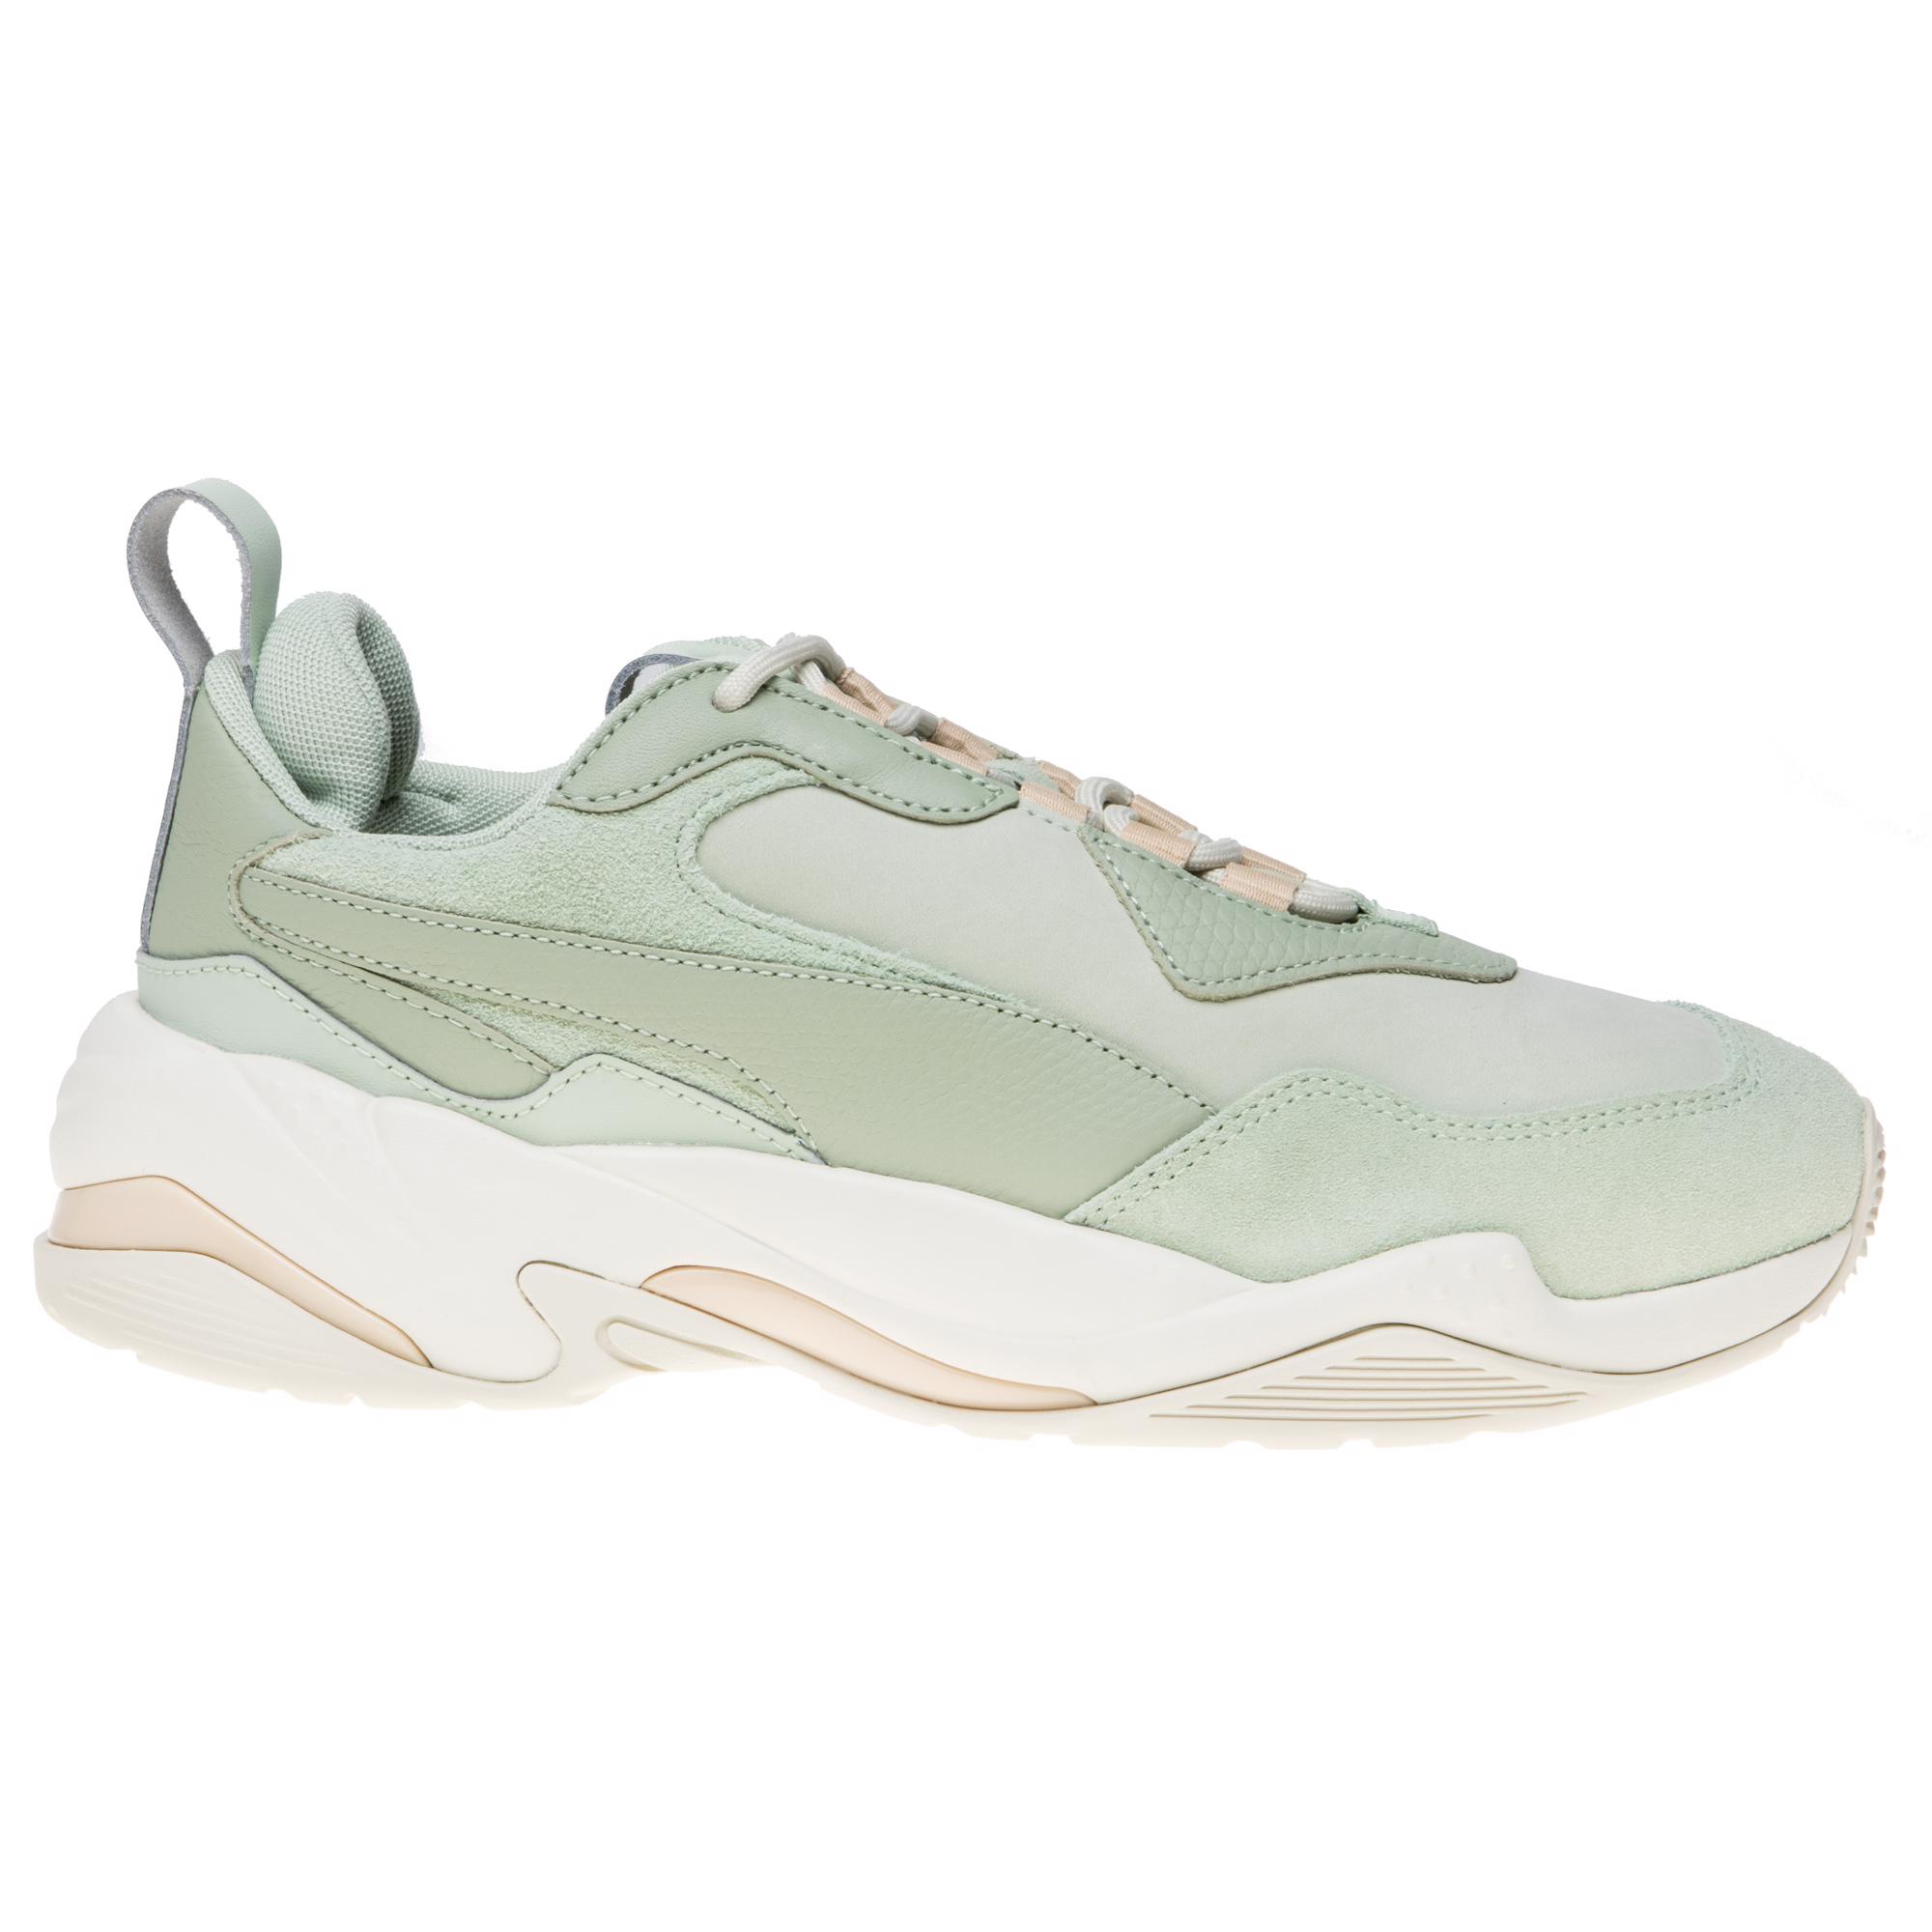 silent Extraordinary stand out Cheap Womens Green Puma Thunder Sneaker | Soletrader Outlet